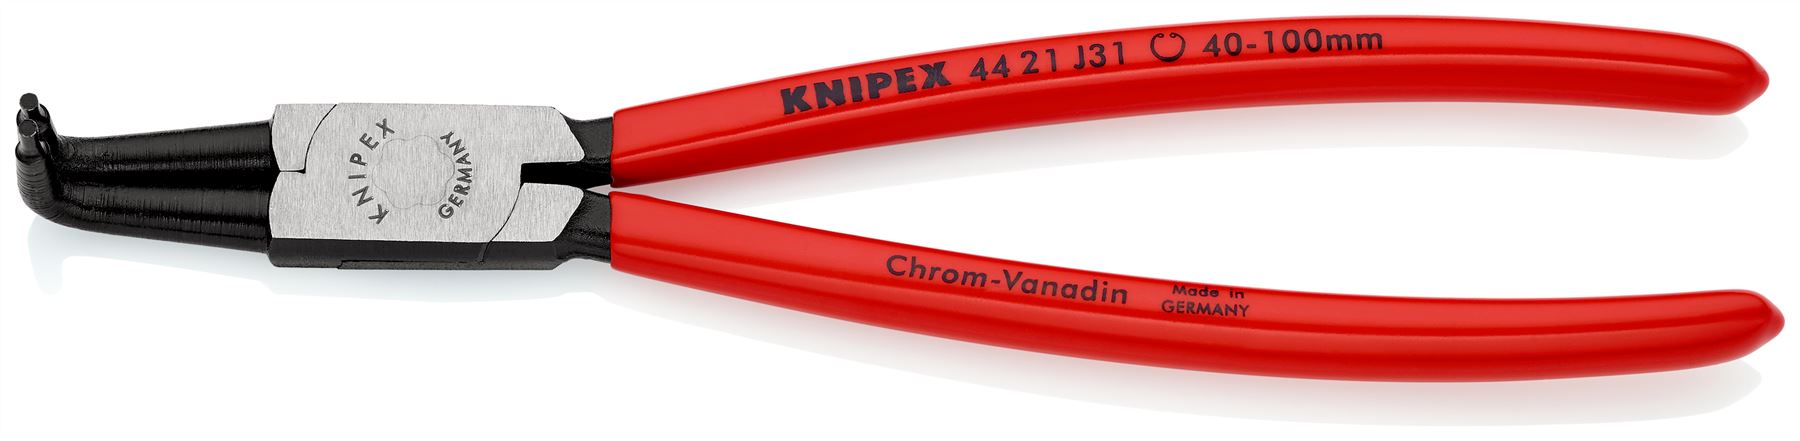 KNIPEX Circlip Pliers for Internal Circlips in Bore Holes Bent Nose 215mm 2.3mm Diameter Tips 44 21 J31